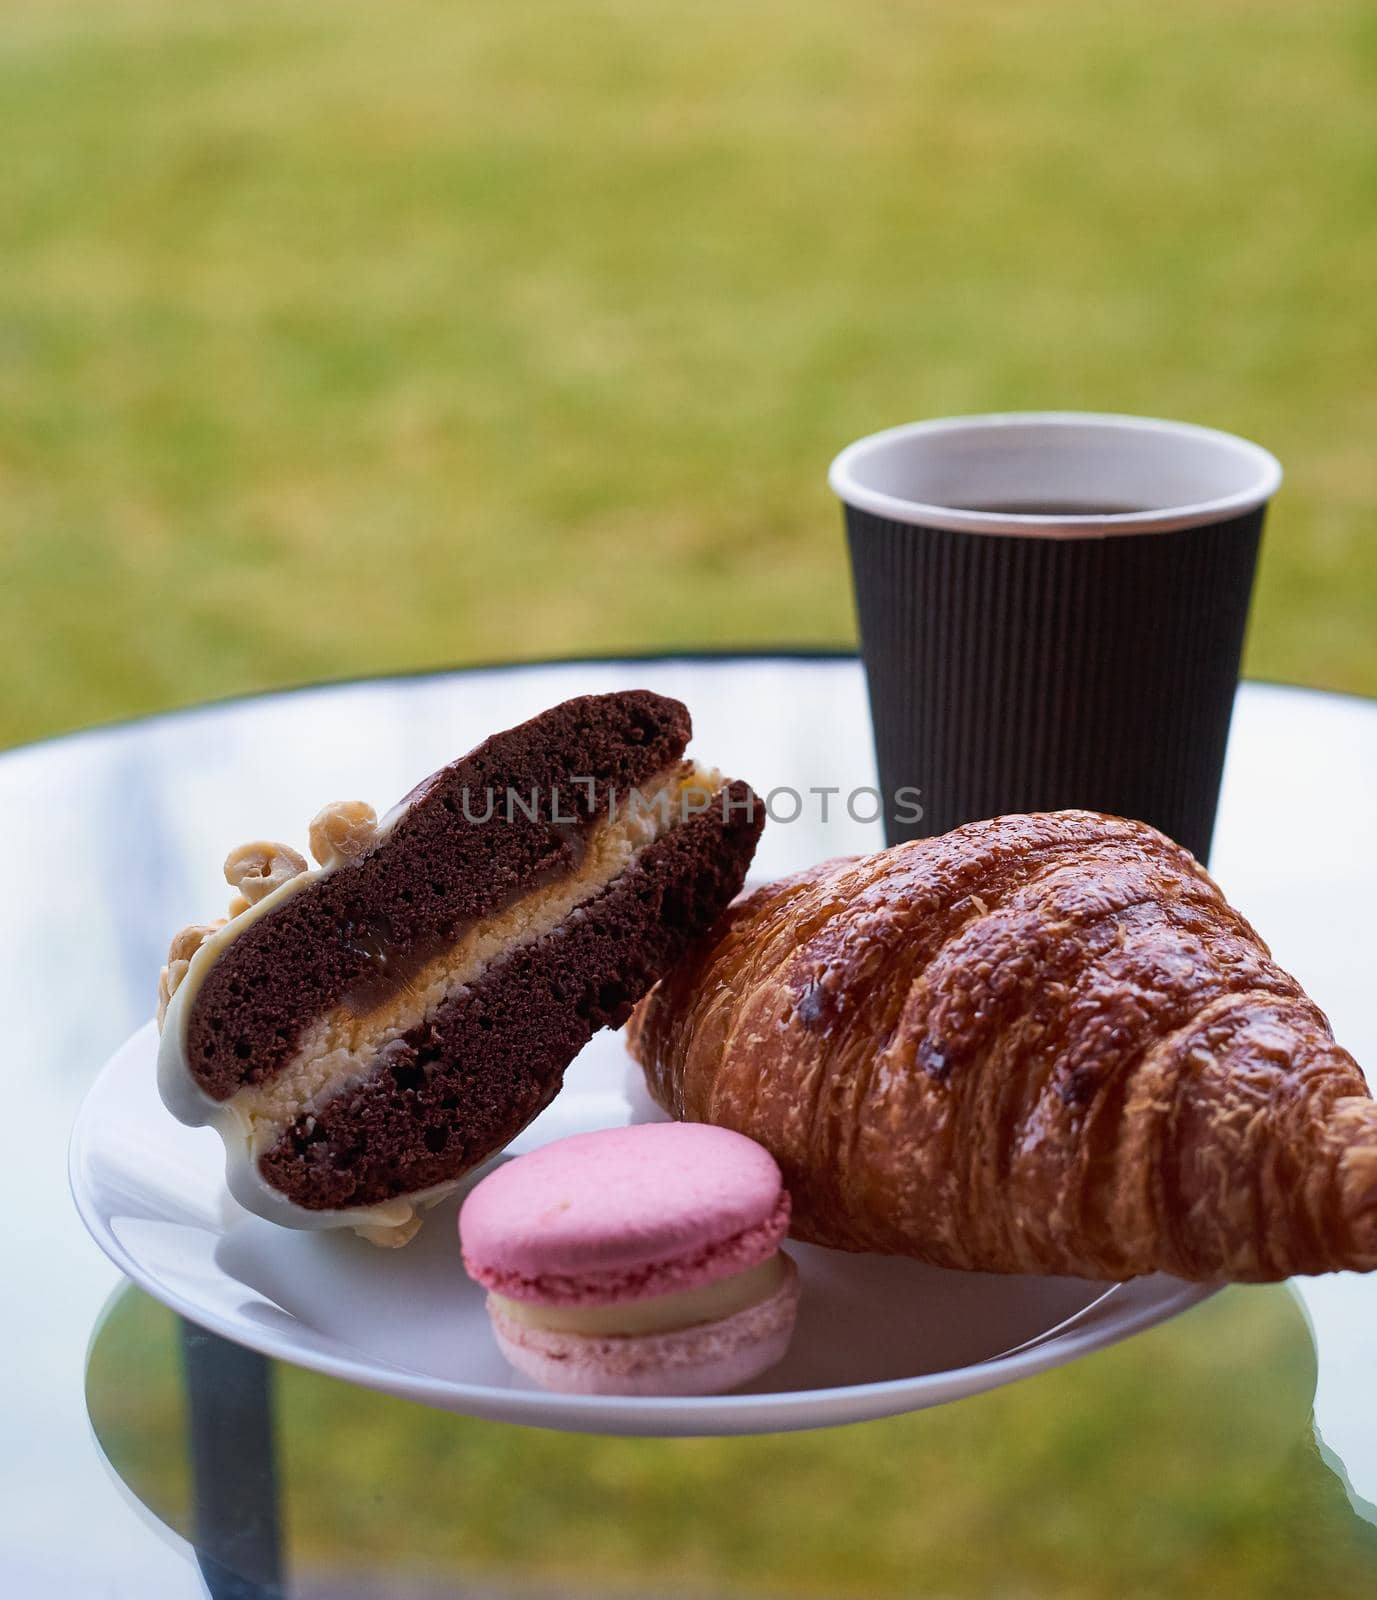 Breakfast with croissant and dessert, coffee or tea in plastic mug, in the village, outdoors, nature. Selective focus. Vertical